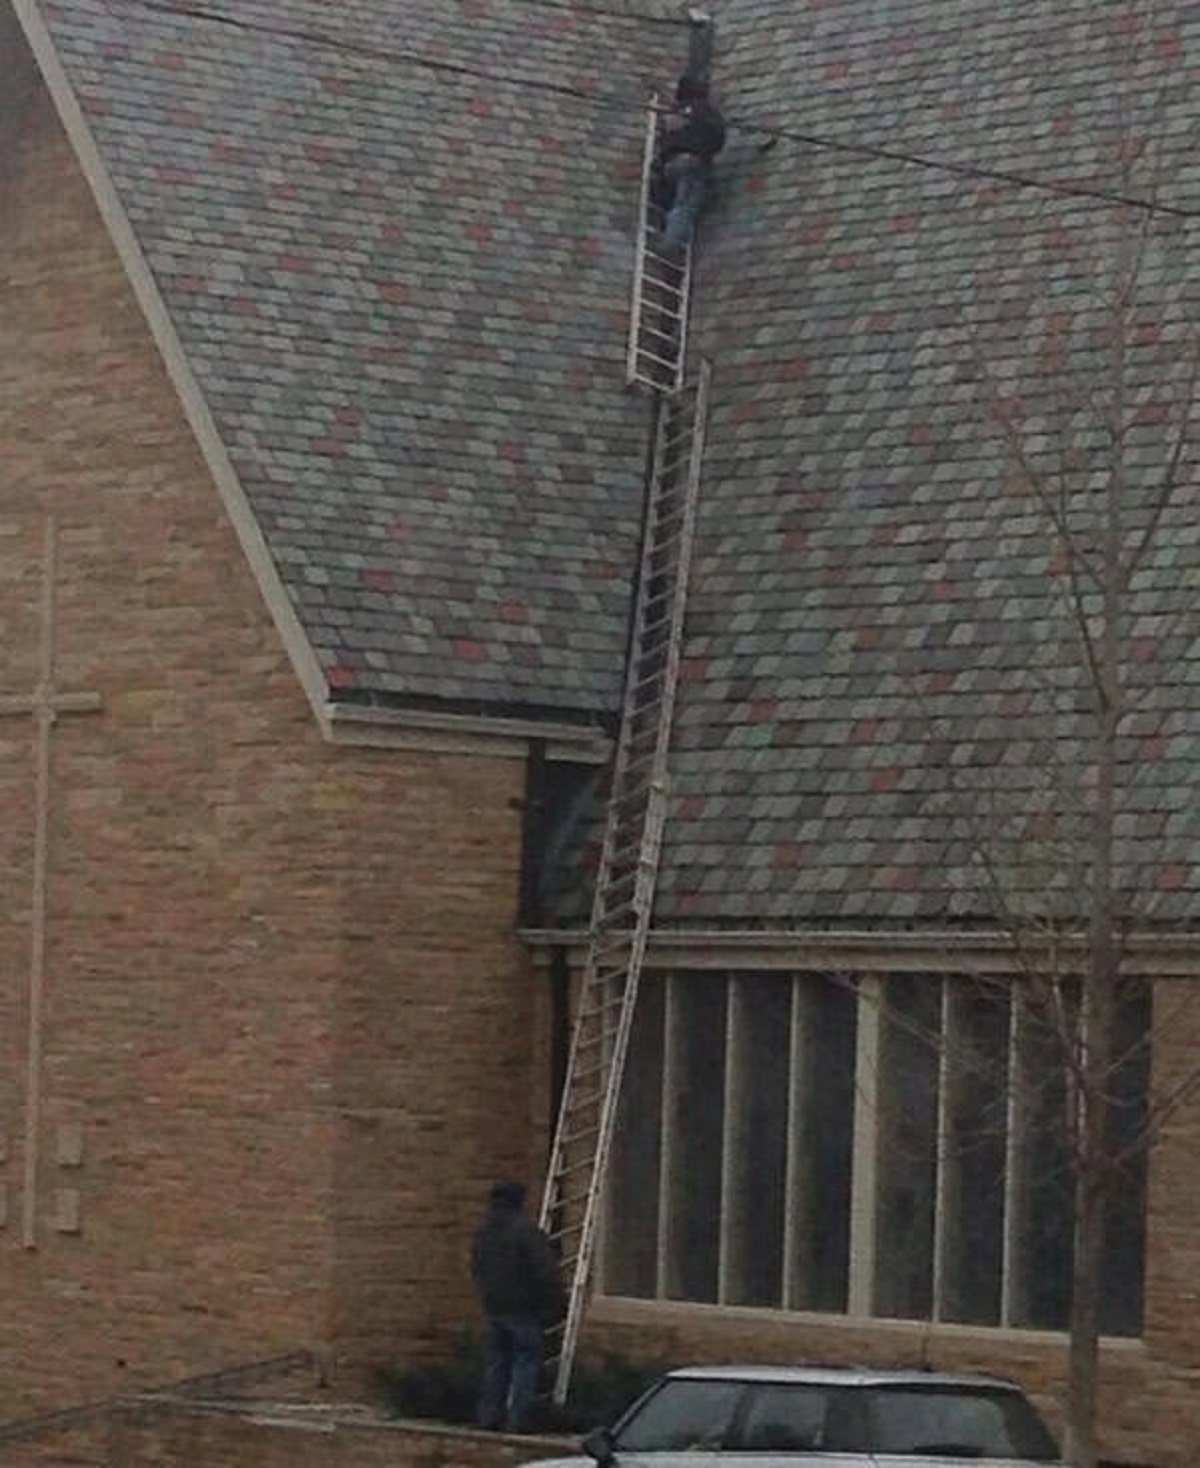 “When I was doing construction I was apparently featured in a ‘safety fails’ site on Pinterest.”